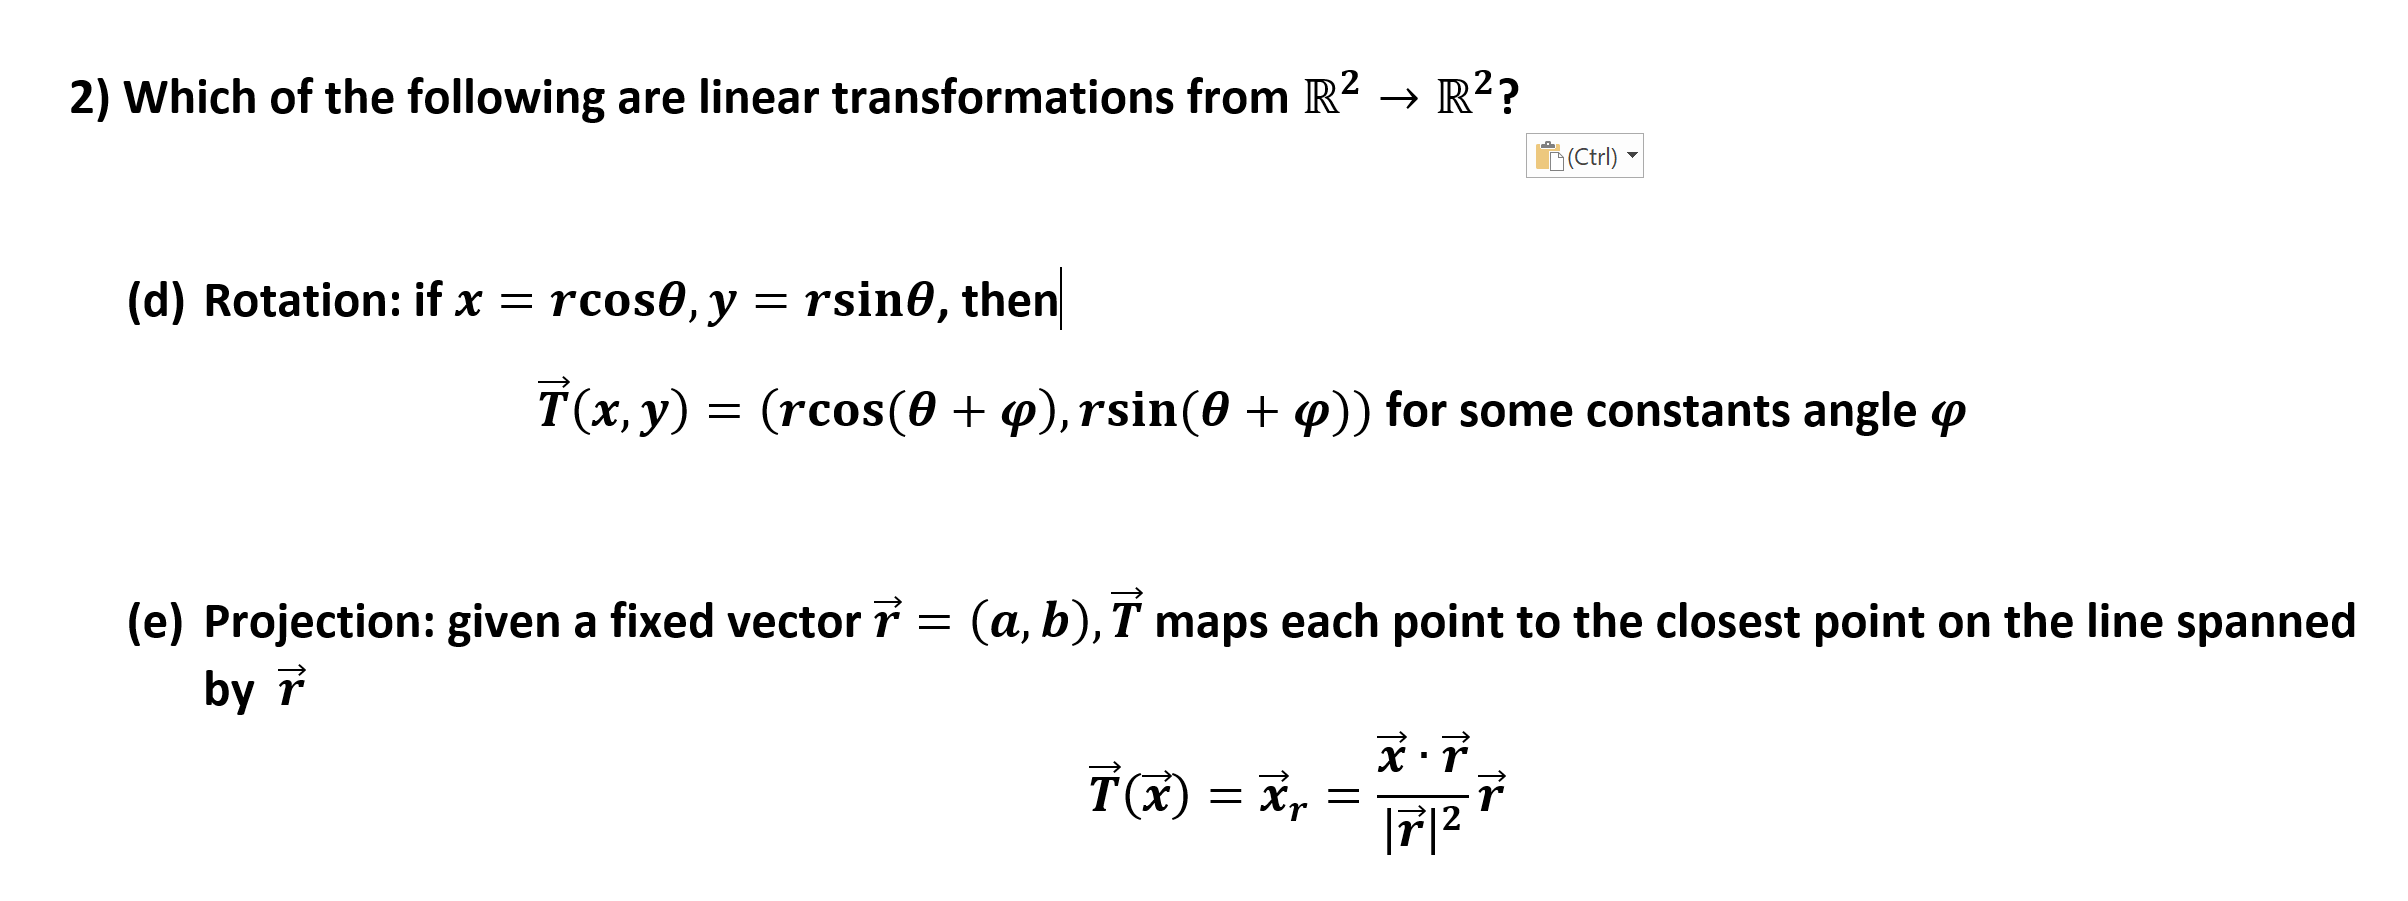 R2R2?
2) Which of the following are linear transformations from R2
(Ctrl)
rsin0, then
rcos0, y
(d) Rotation: if x =
T(x, y)
(rcos(0
, rsin(0 + p)) for some constants angle p
(e) Projection: given a fixed vector 7
by
(a, b), T maps each point to the closest point on the line spanned
r
|712
